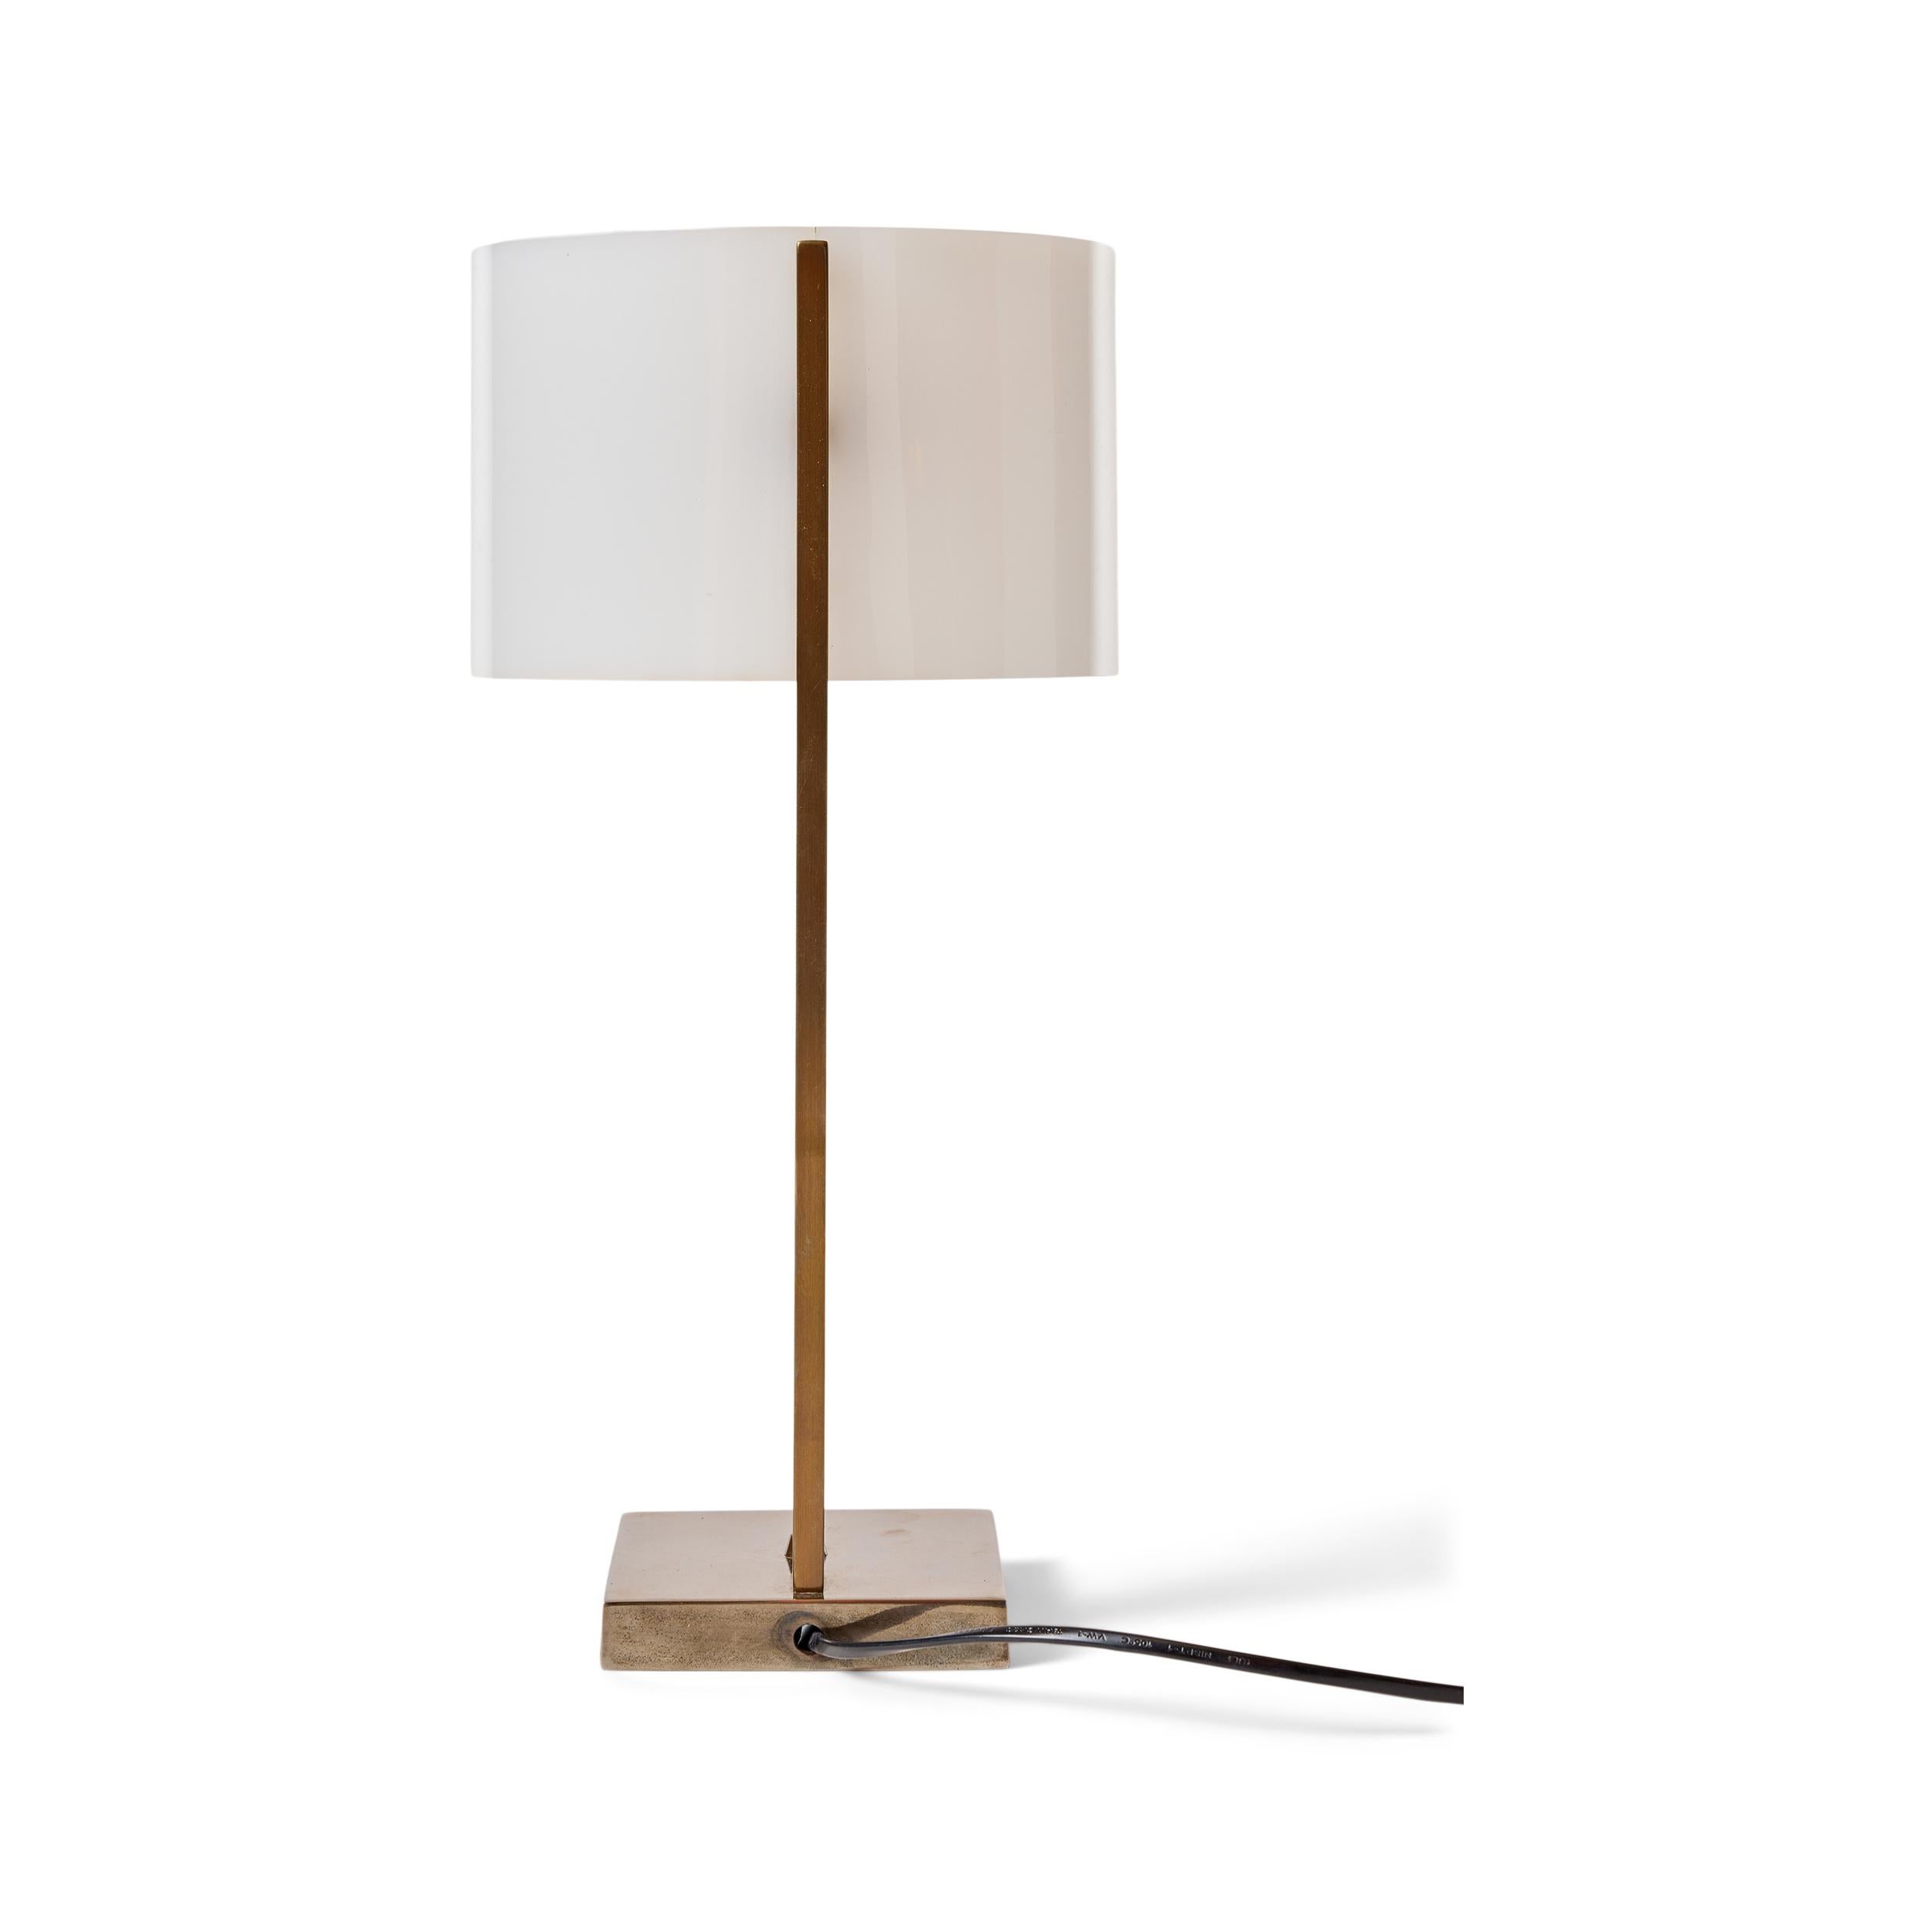 Swedish Table Lamp by Uno & Östen Kristiansson for Luxus, 1960s